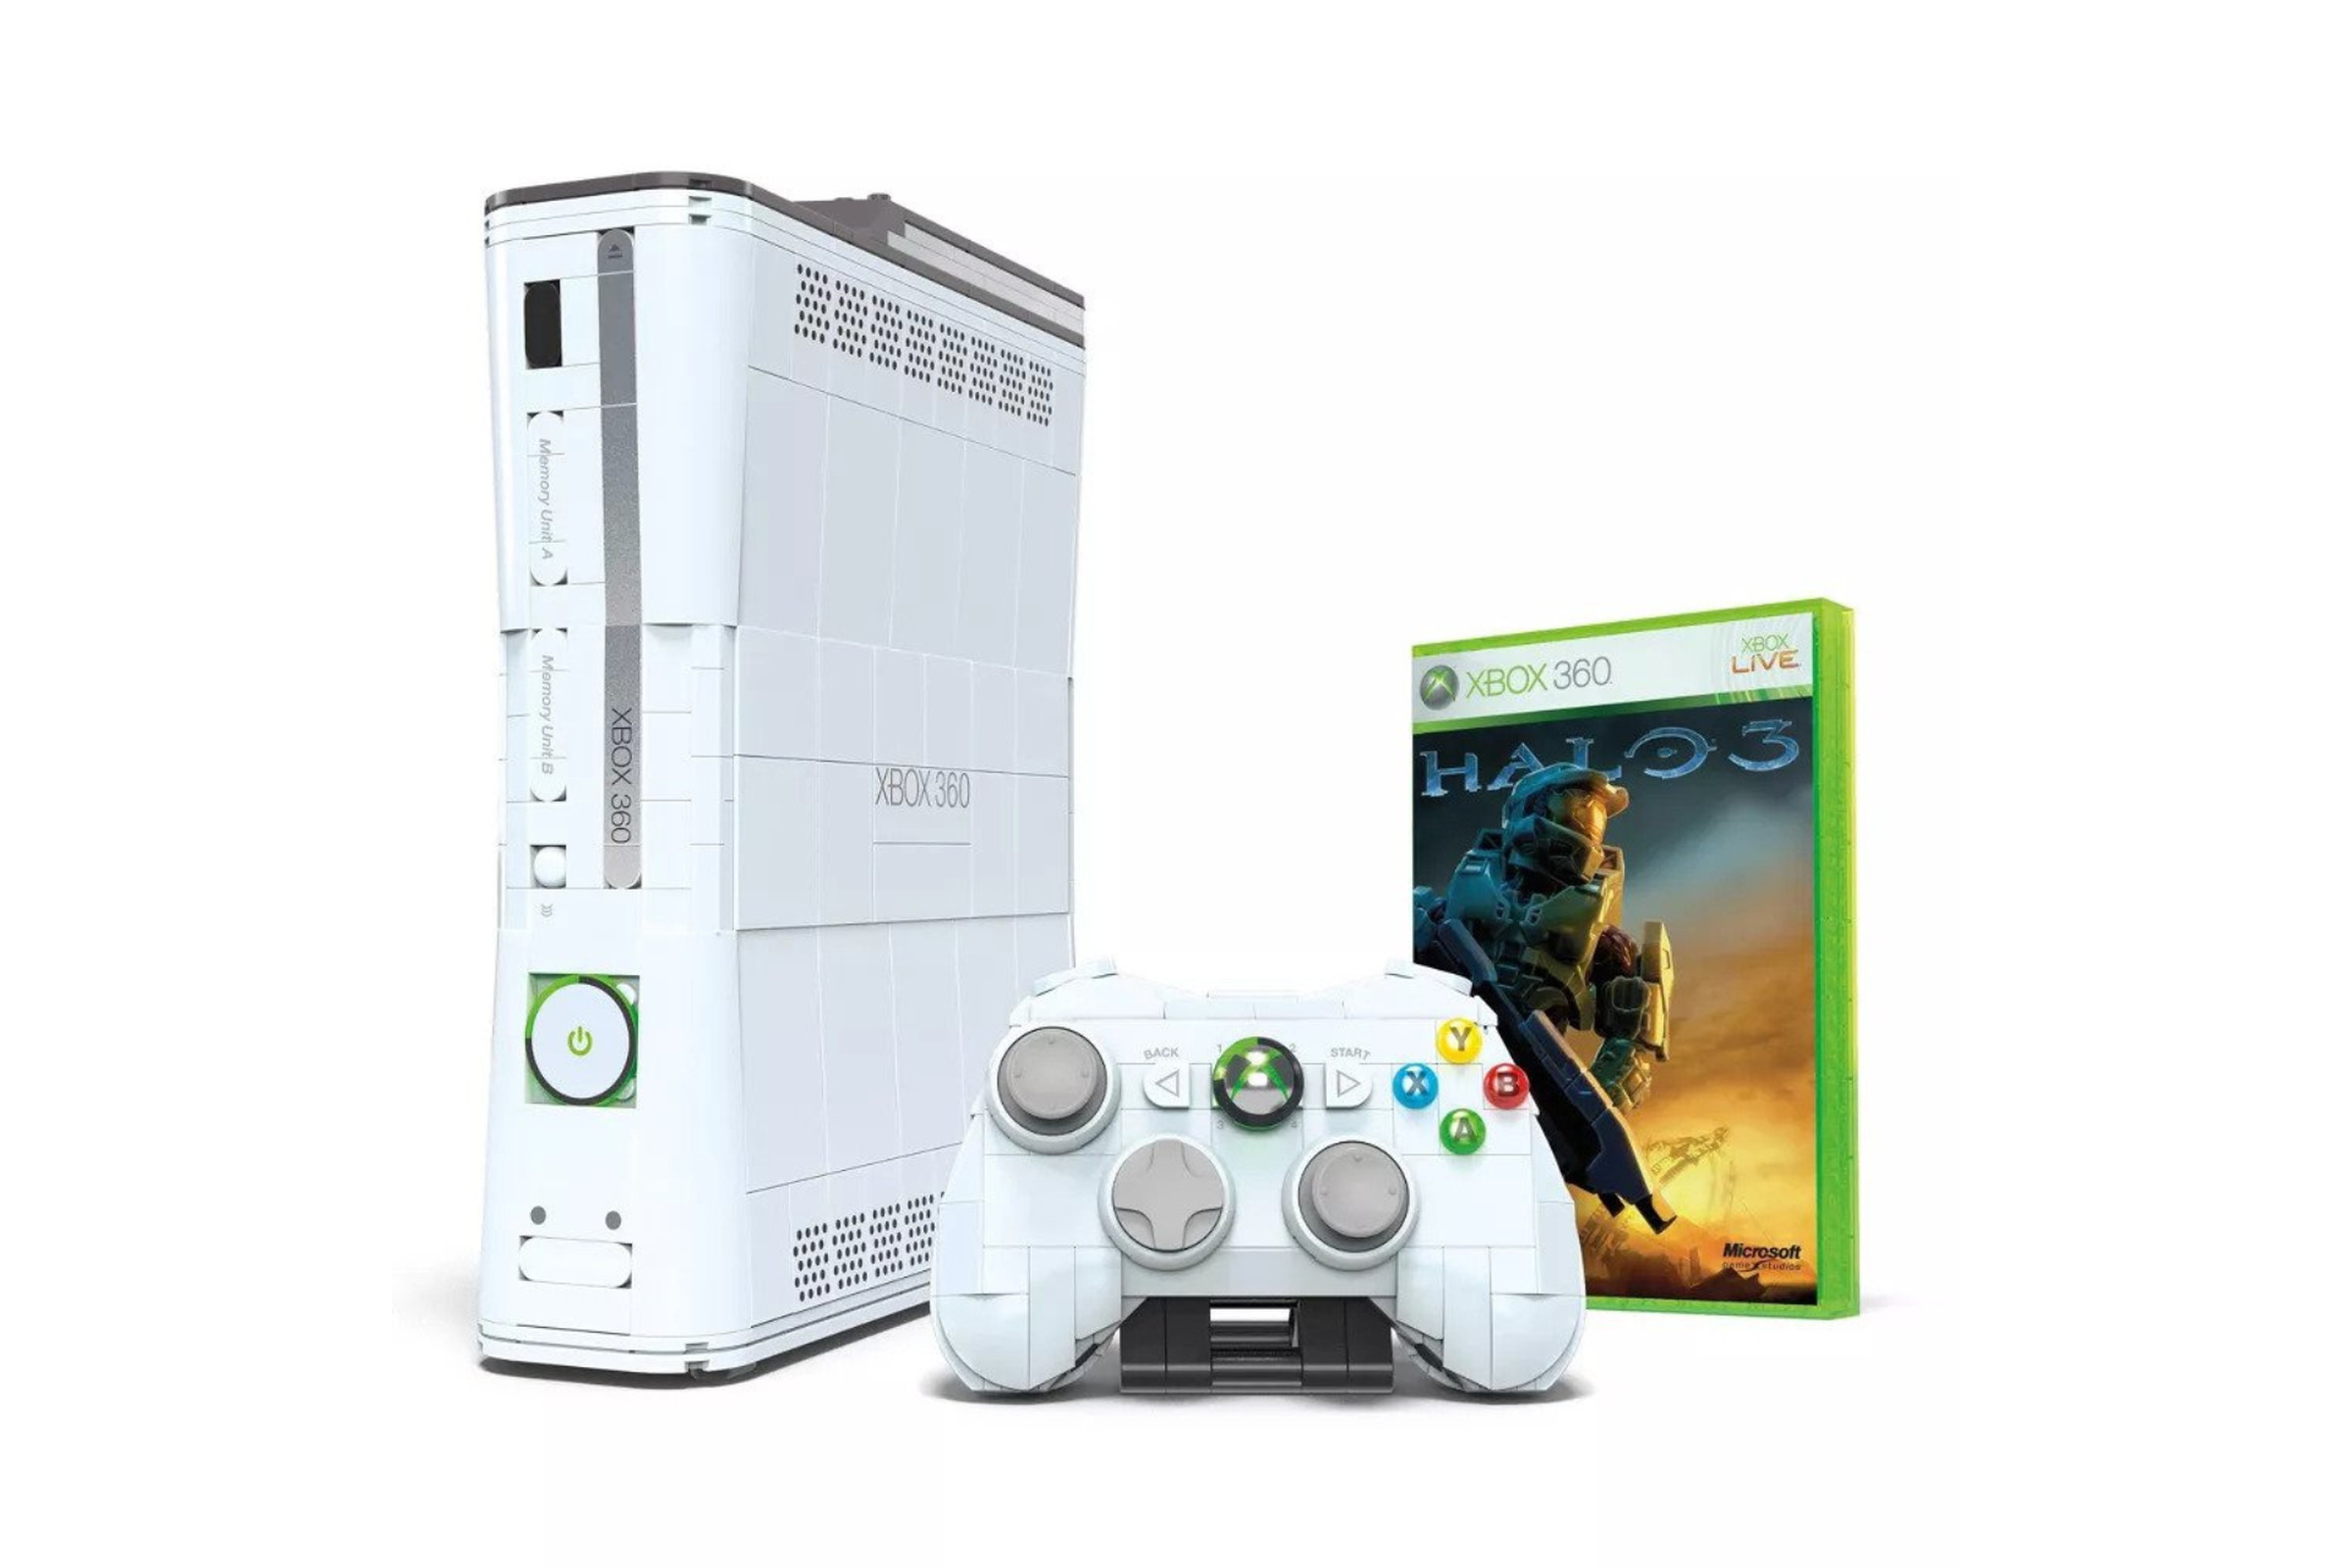 Screenshot from Mega’s Xbox 360 replica console featuring the brick-constructed console, a controller, and a copy of Halo 3